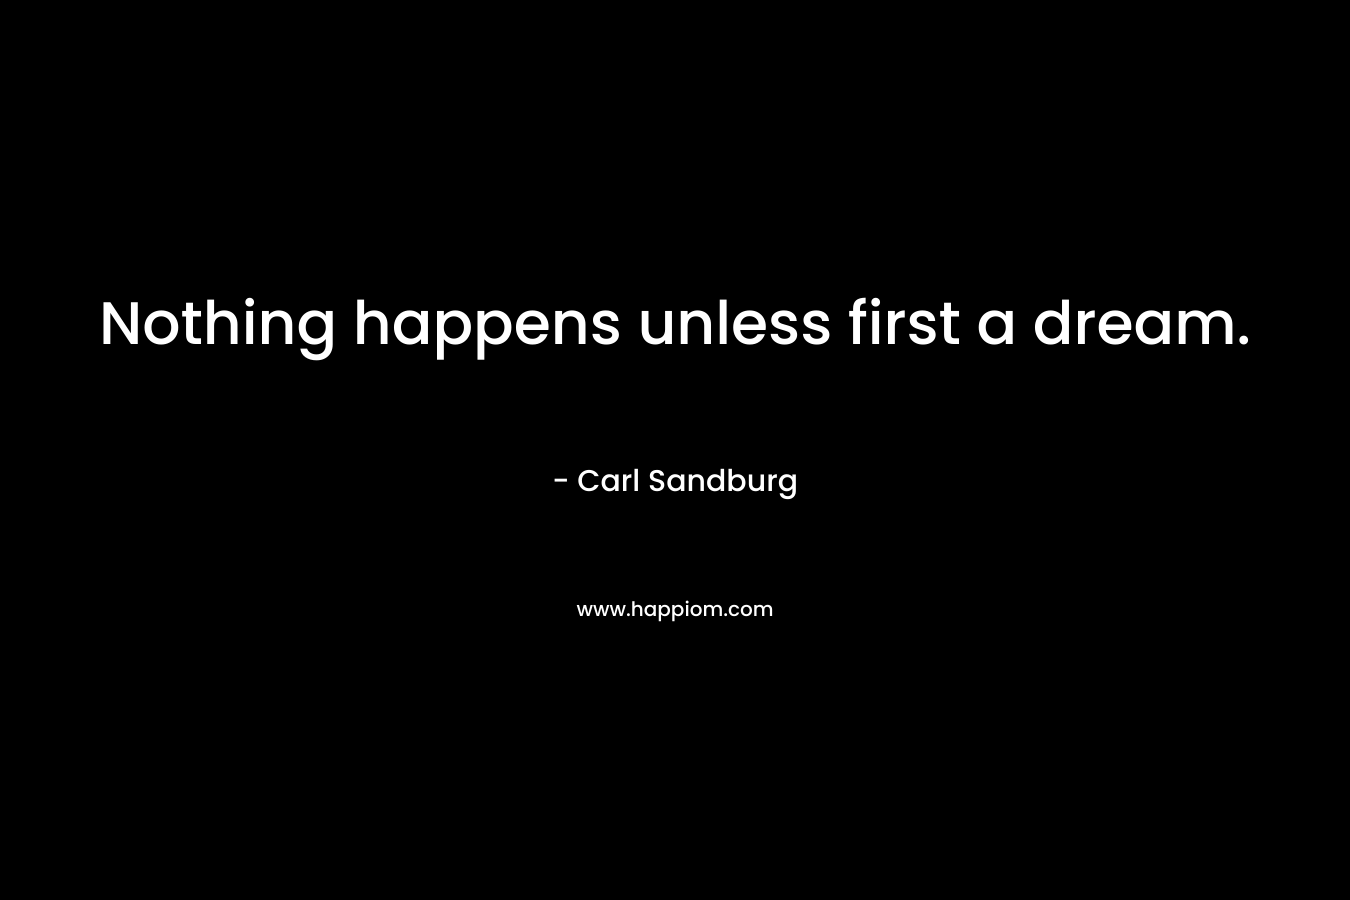 Nothing happens unless first a dream.